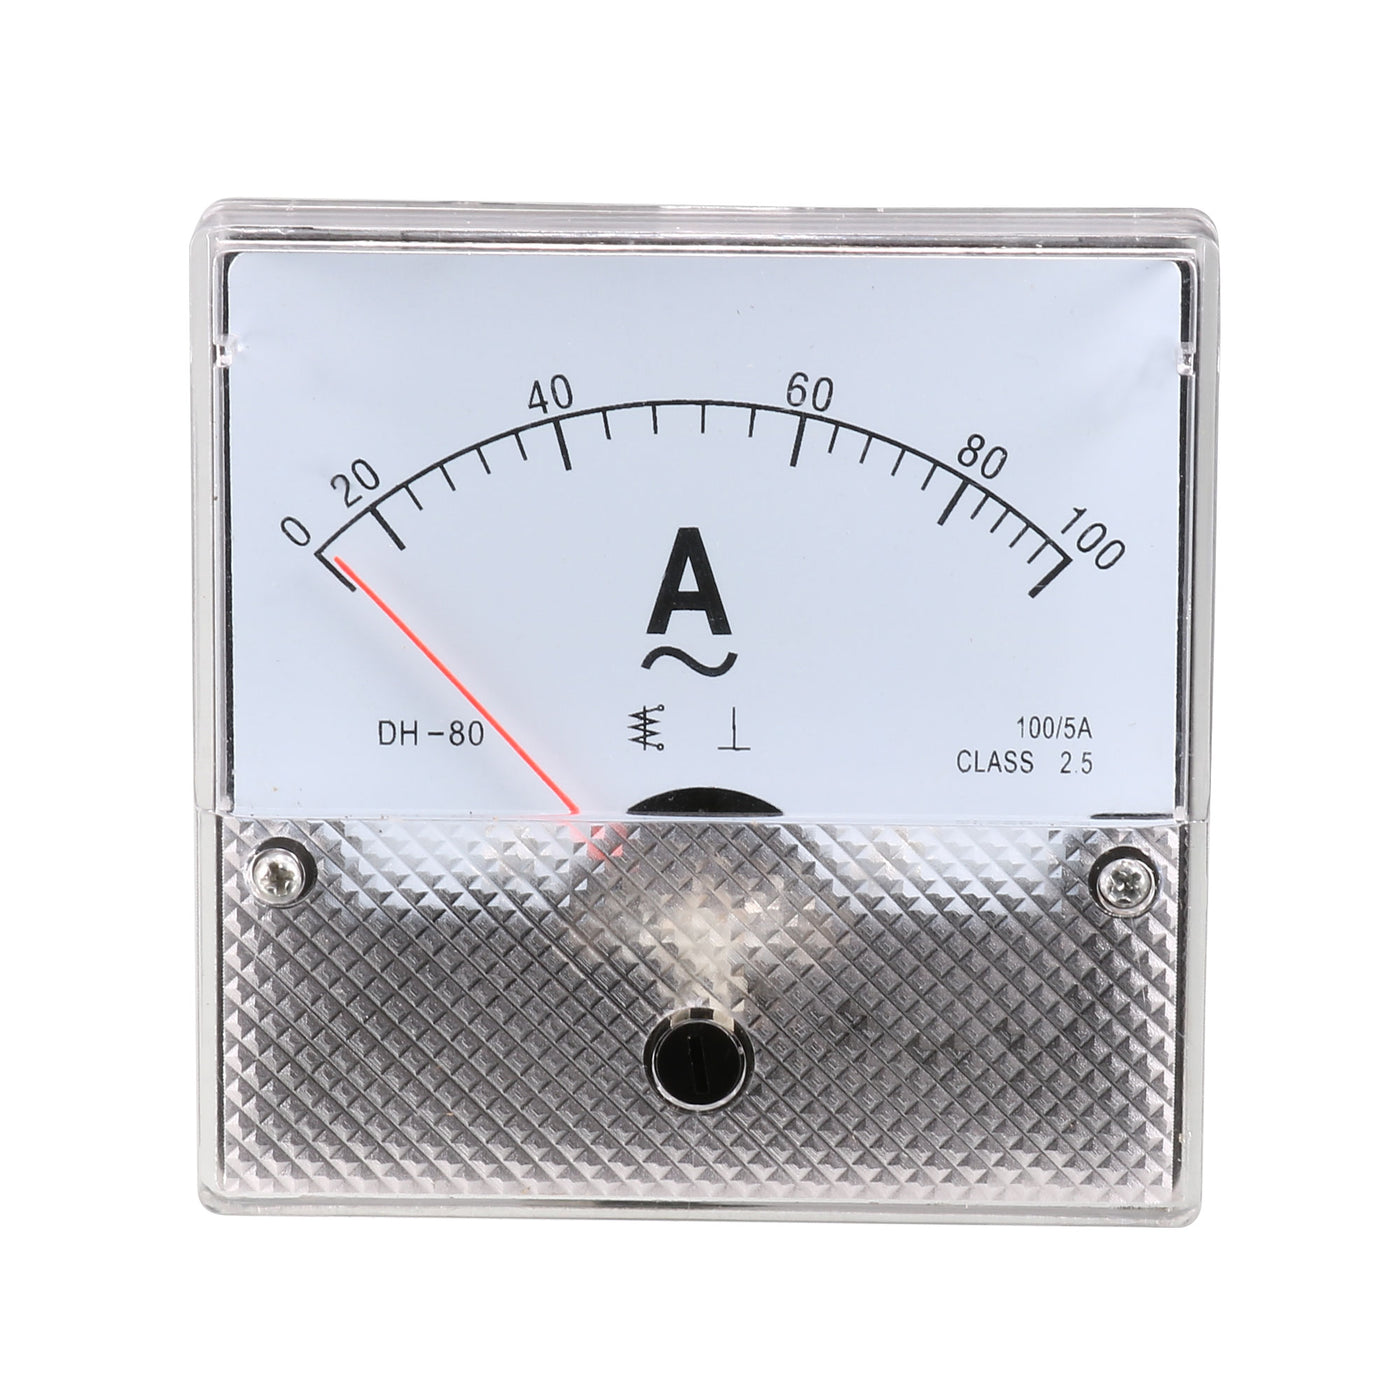 uxcell Uxcell AC 0-100A Analog Panel Ammeter Gauge Ampere Current Meter DH-80 2.5 Error Margin